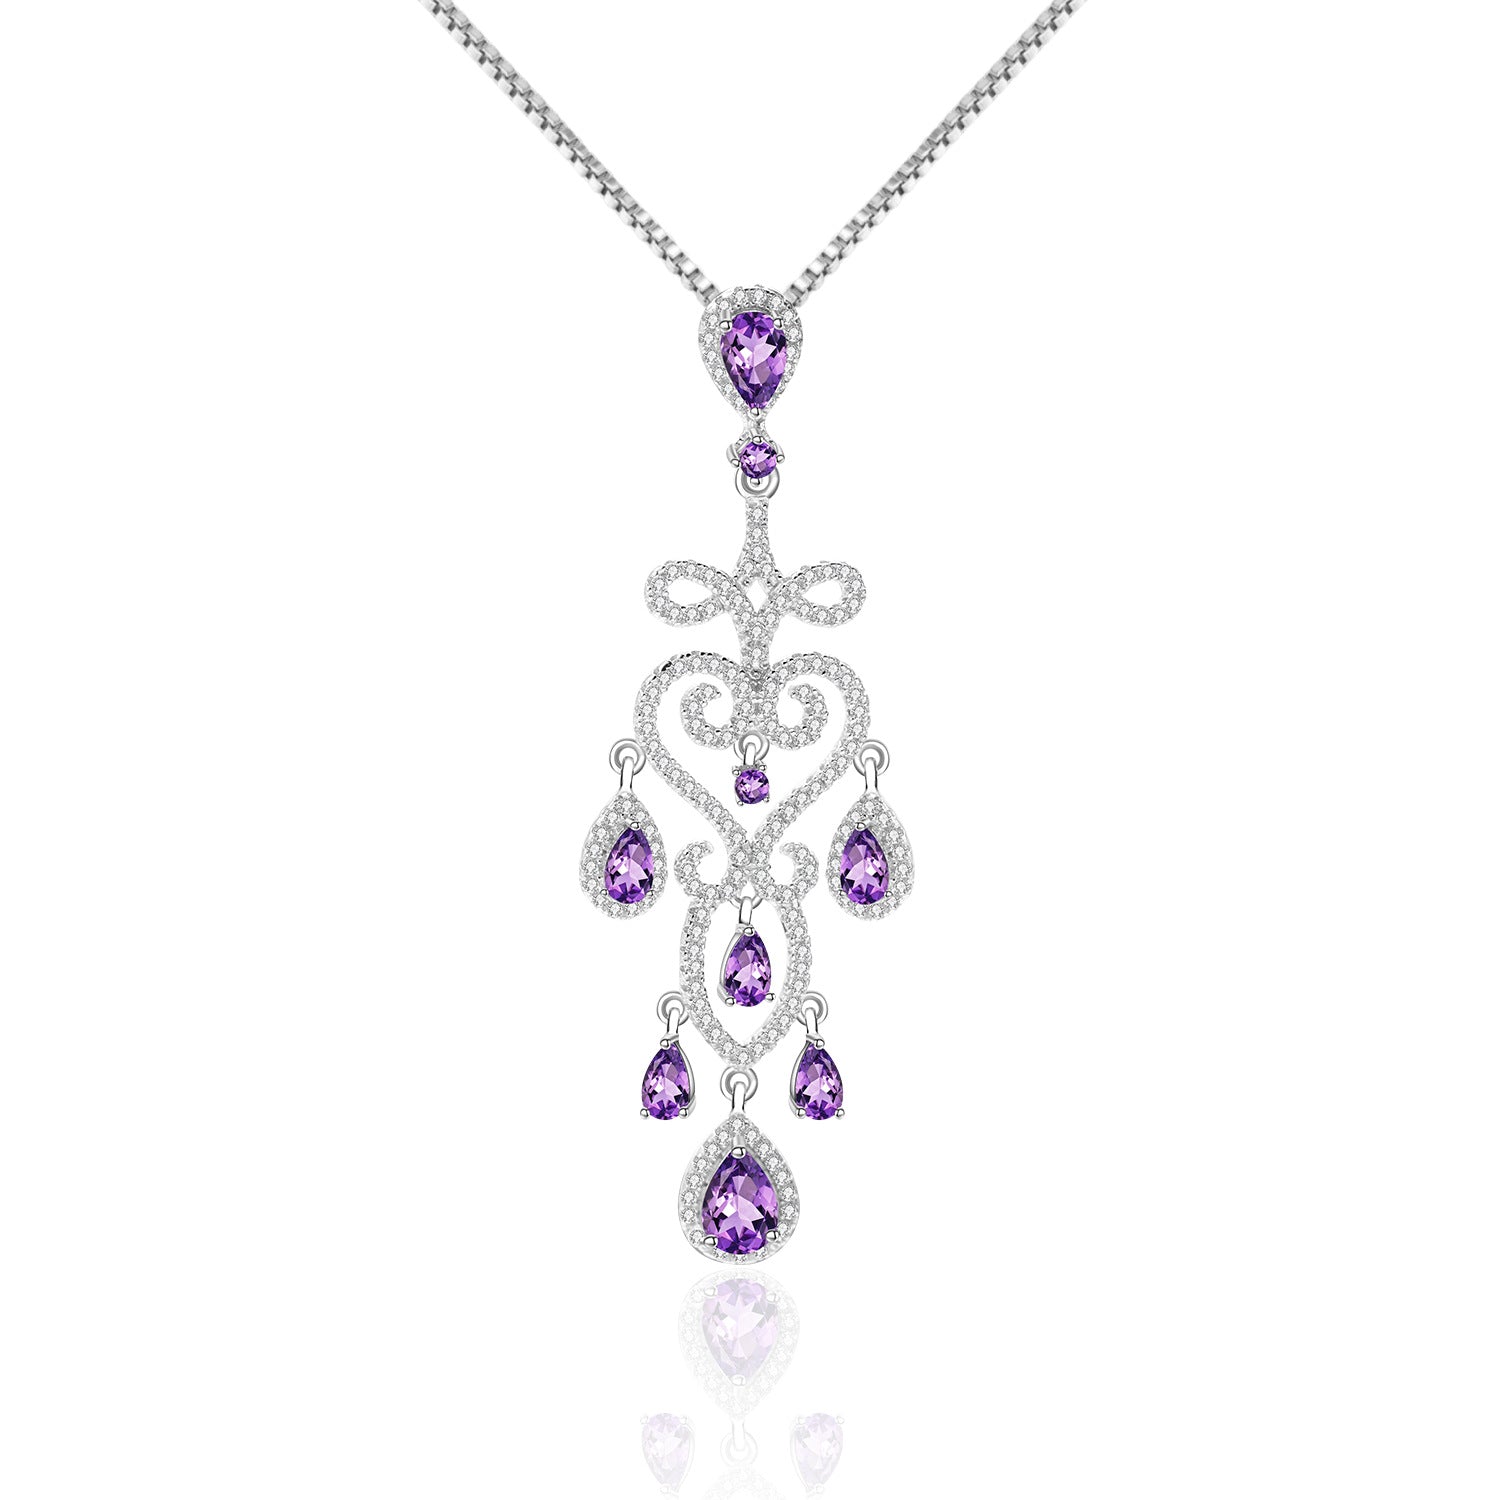 French Romantic Luxury Natural Amethyst Premium Pendant Necklace for Women